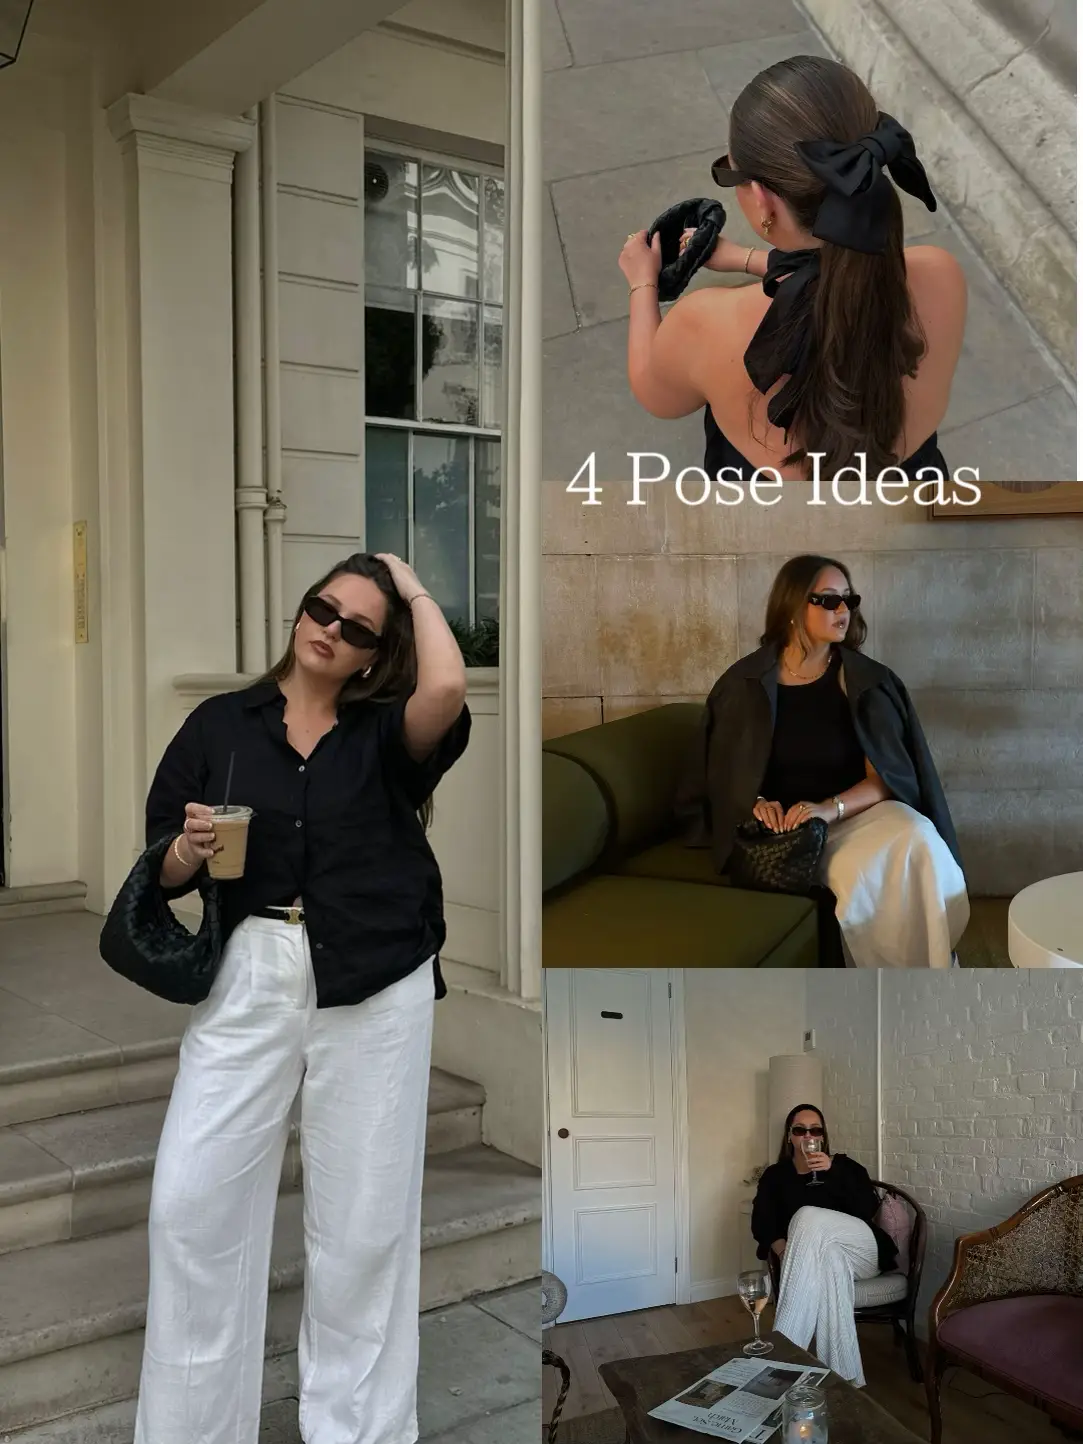 4 Pose Ideas for an aesthetic pic!, Gallery posted by Ella Scott